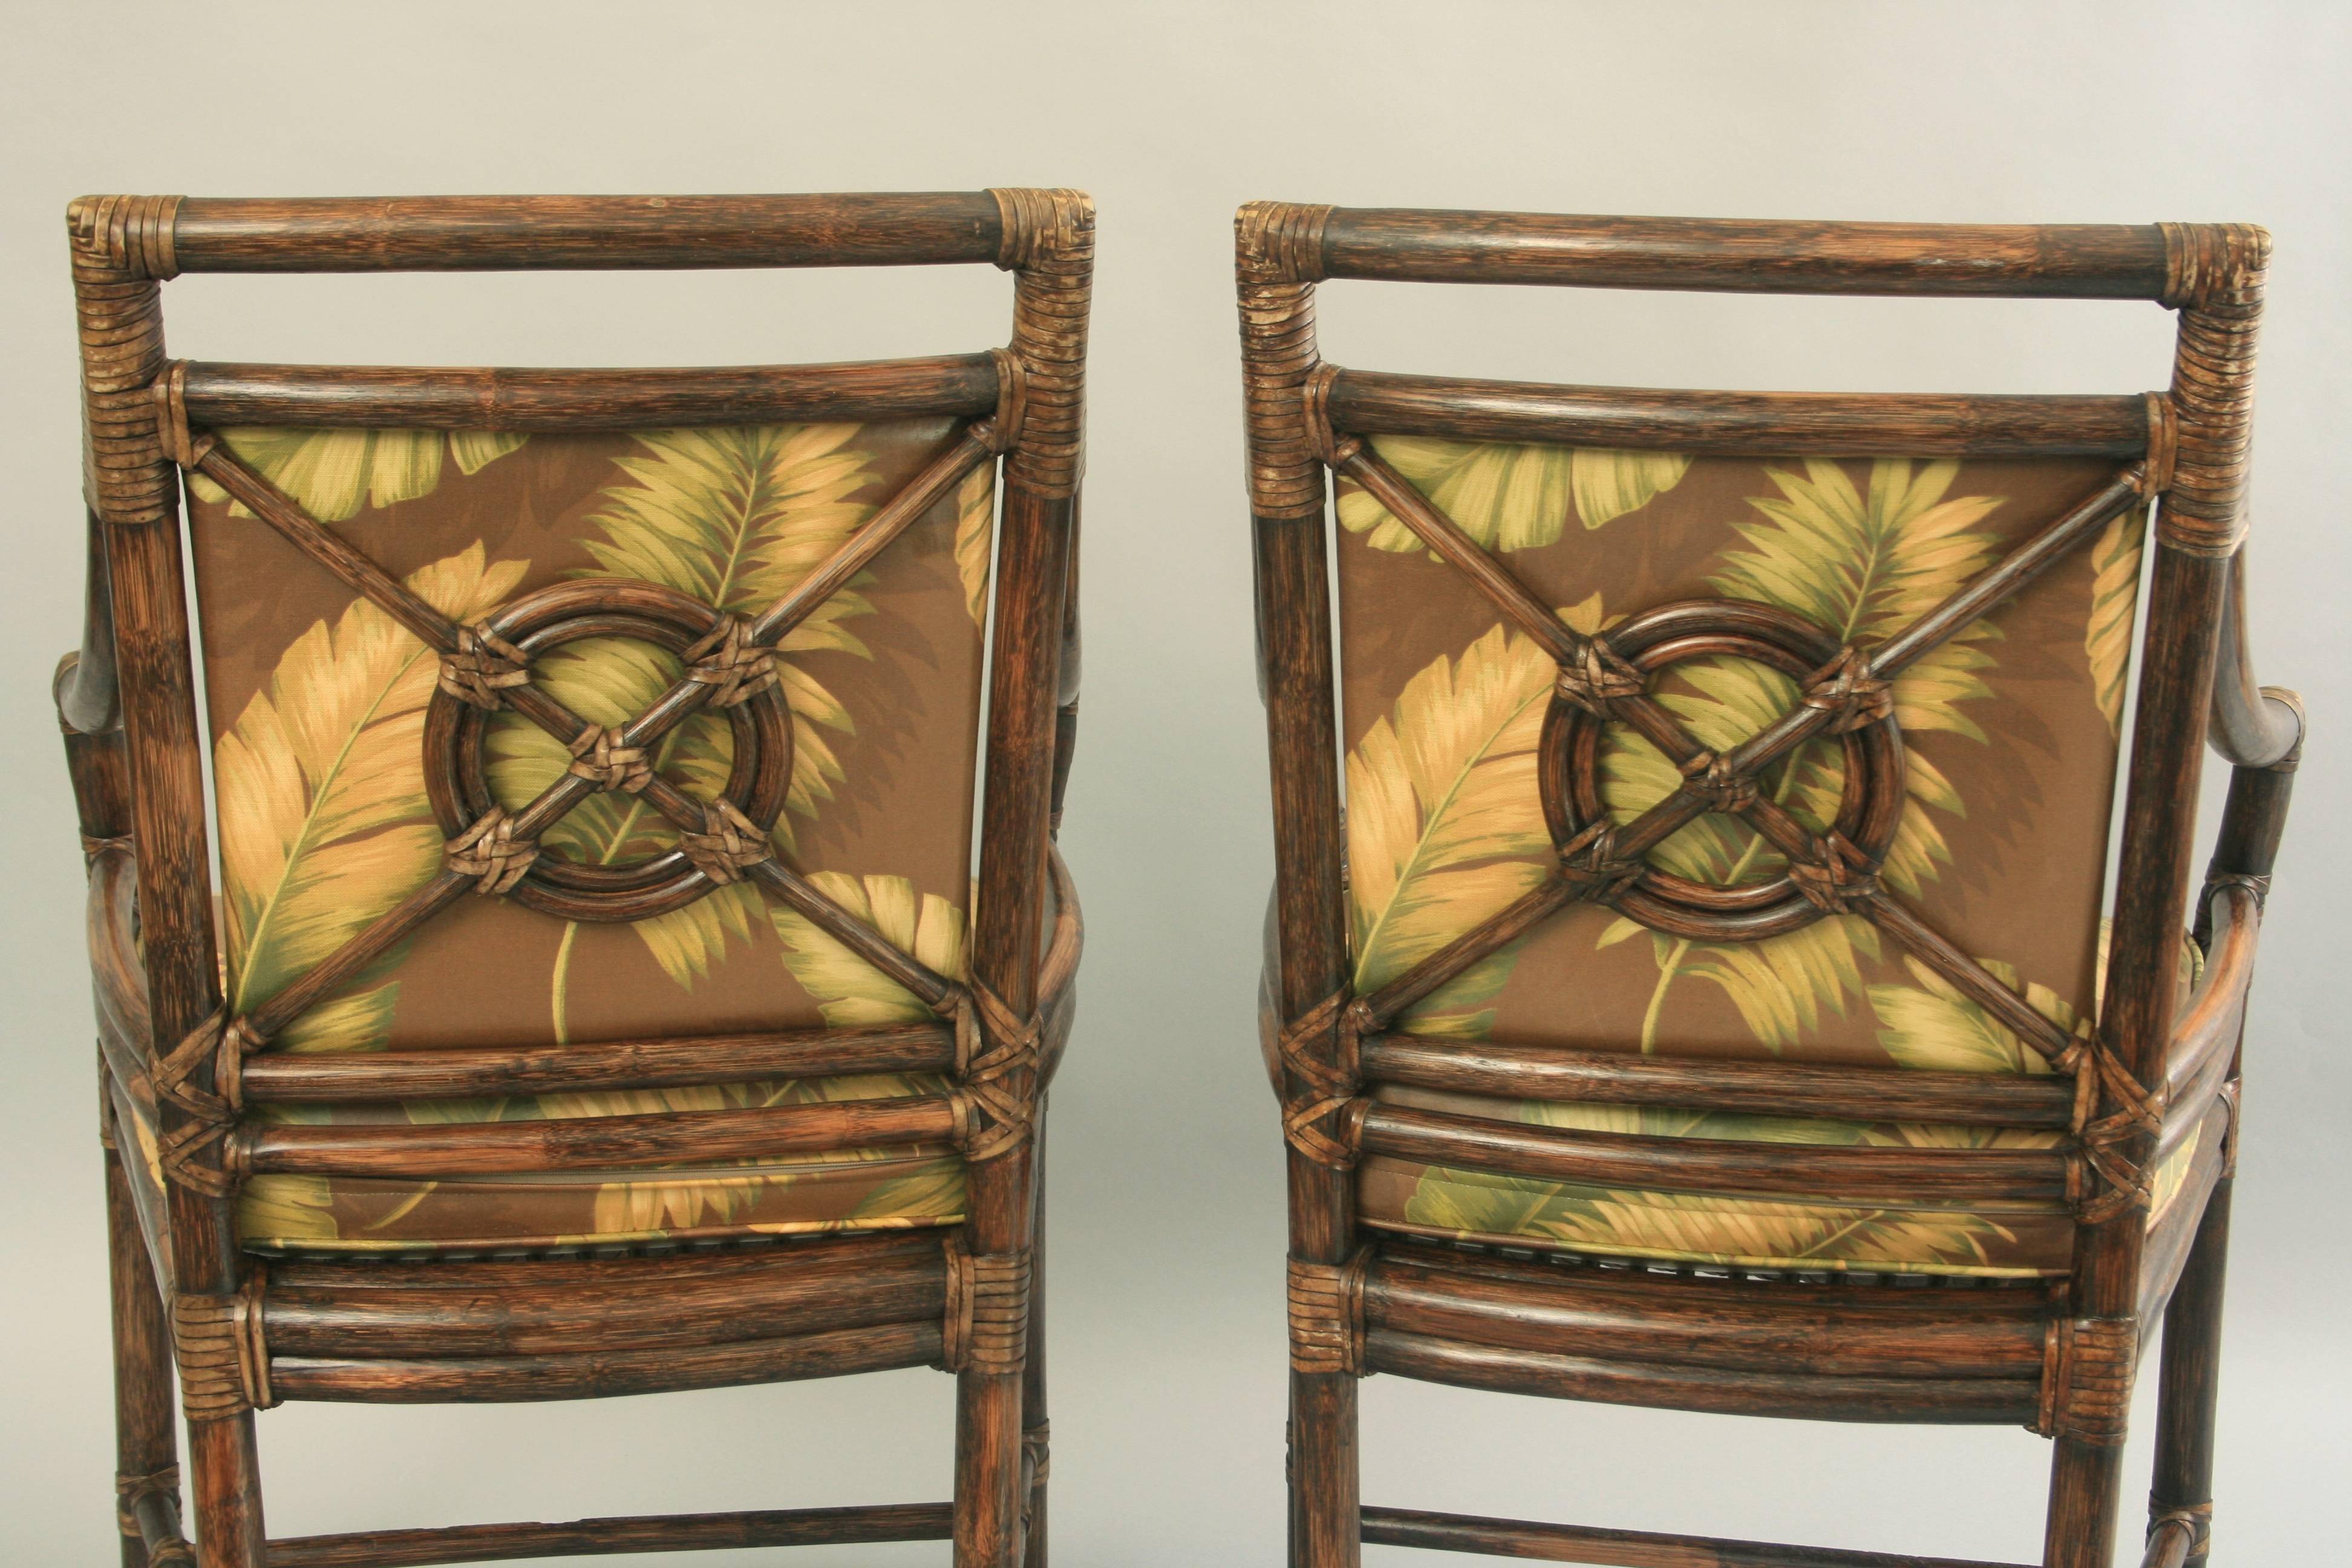 Pair of McGuire Rattan Target Back Arm Chairs. Chairs feature solid wood construction, rawhide corner wraps, target back, removable vinyl seat cushions with tropical palm print, original labels, great quality and form, circa mid-late 20th century.